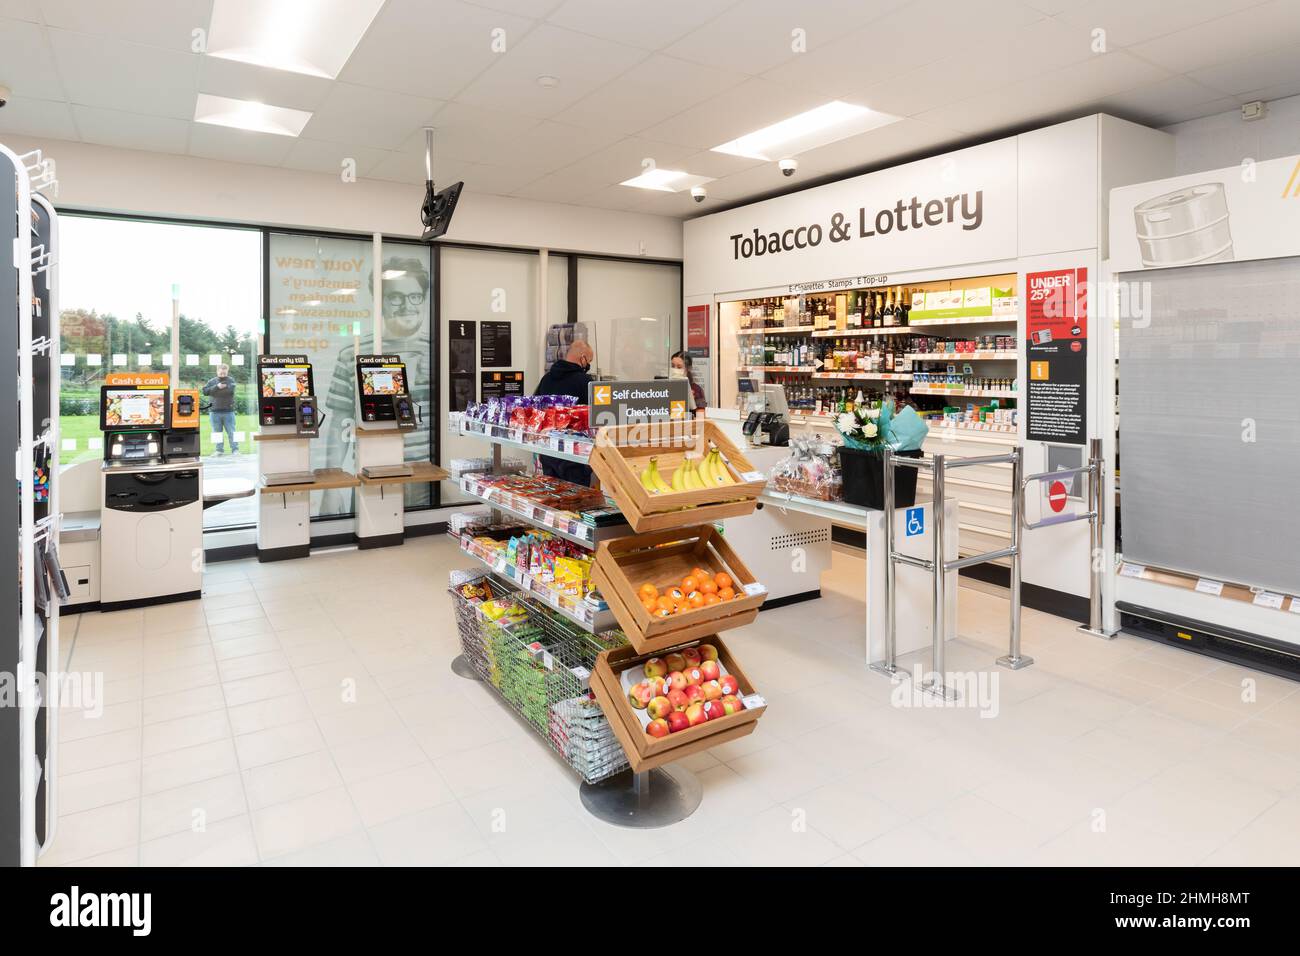 Inside a Sainsbury's Local store in the UK, showing the till area with tobacco and lottery products Stock Photo